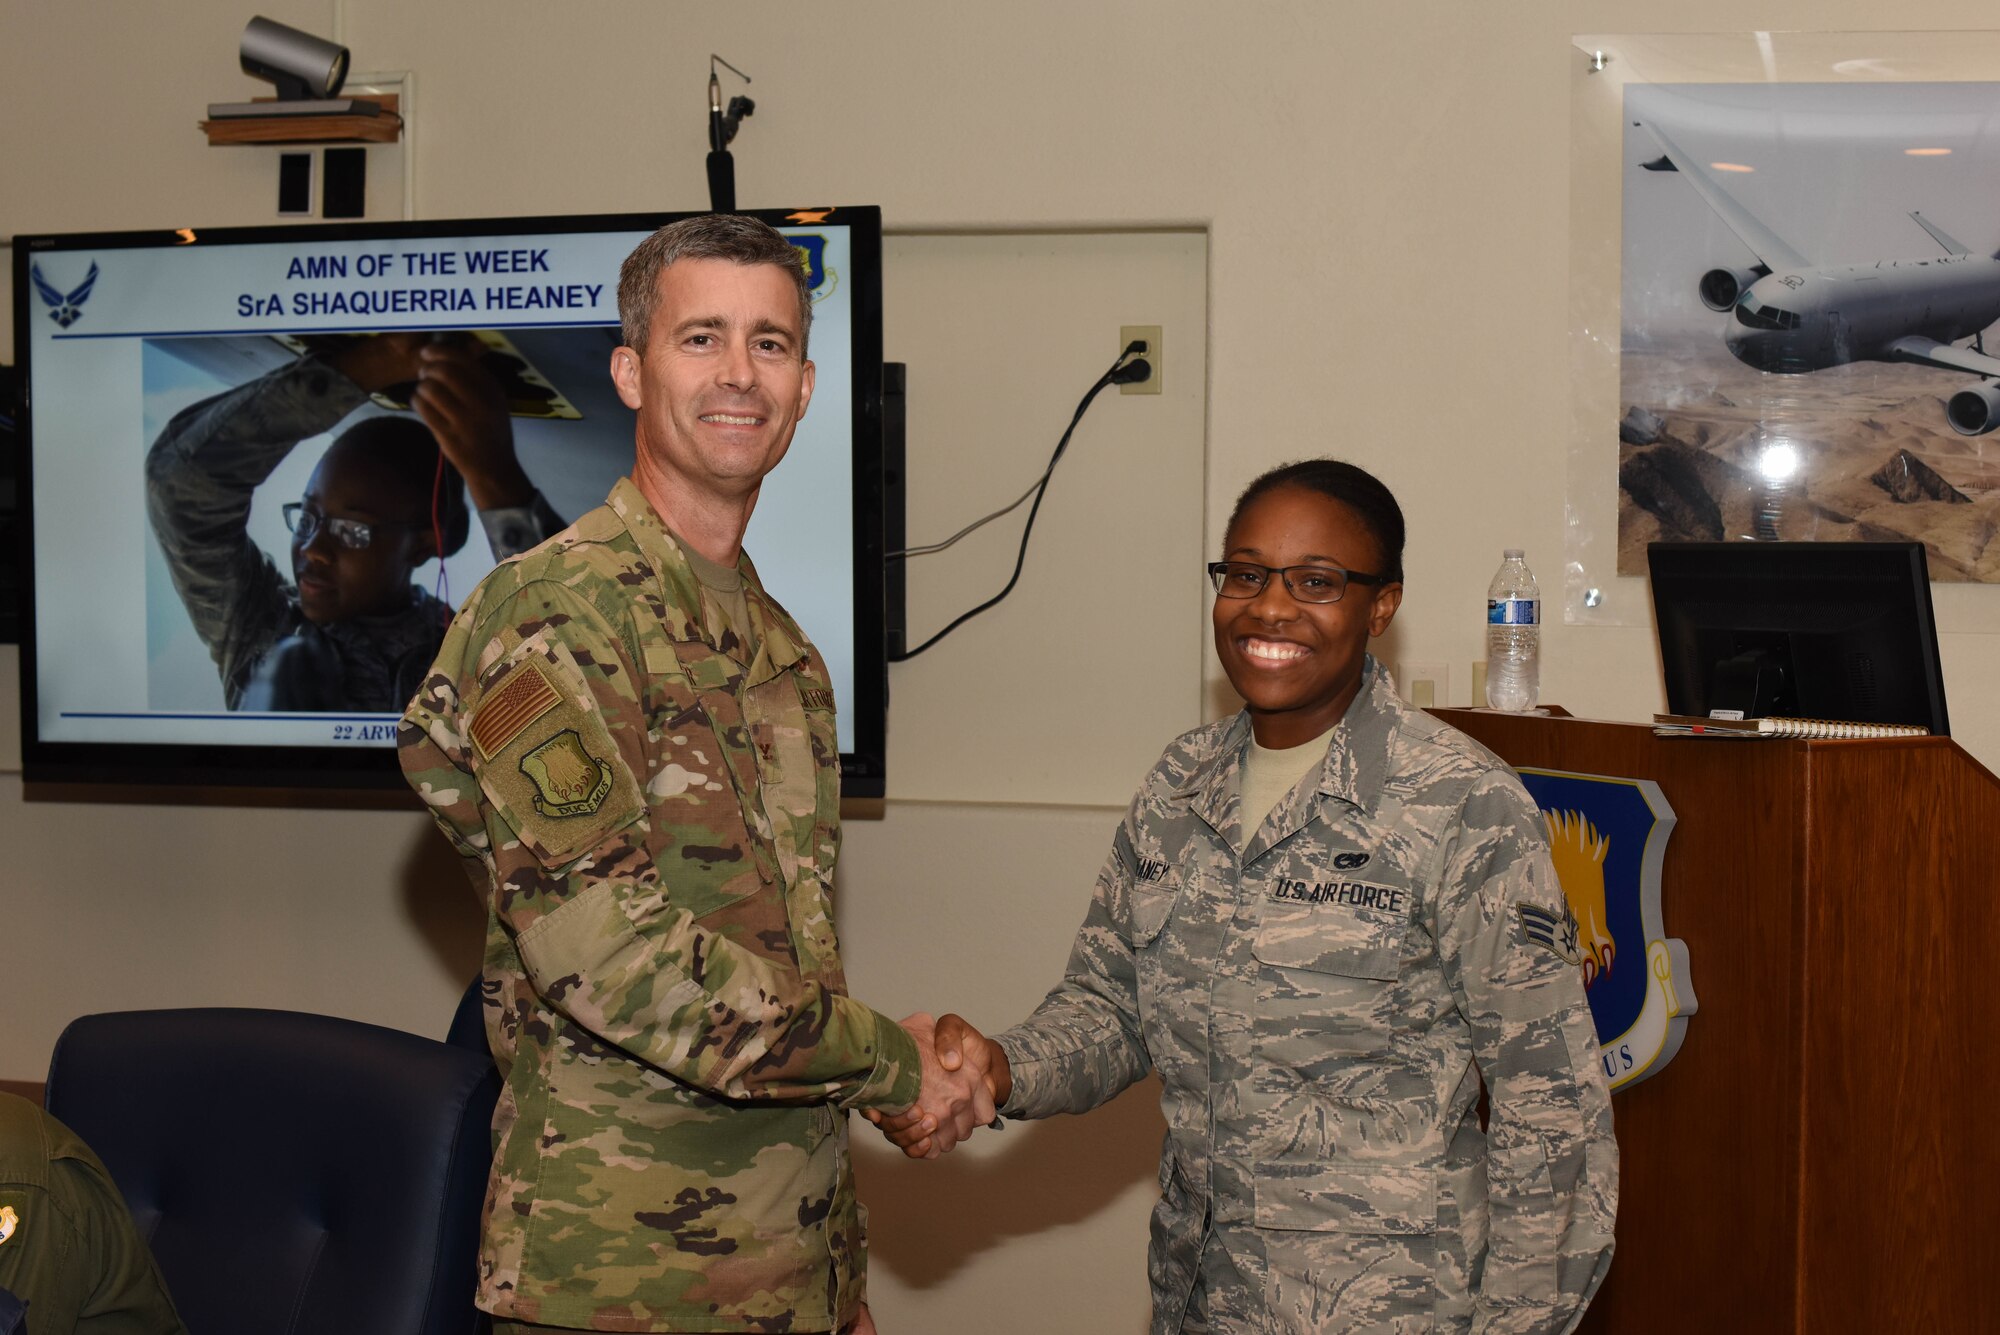 Col. Rich Tanner, 22nd Air Refueling Wing commander, presents a coin to Senior Airman Shaquerria Heaney, 22nd Aircraft Maintenance Squadron electrical and environmental systems journeyman, for being highlighted as the Airman of the Week Sept. 12, 2019, at McConnell Air Force Base, Kan. Heaney provides everyday maintenance by trouble-shooting component failures, maintaining component integrity and ensuring that McConnell’s KC-135 Stratotankers are prepared for the refueling mission. (U.S. Air Force photo by Airman 1st Class Marc A. Garcia)